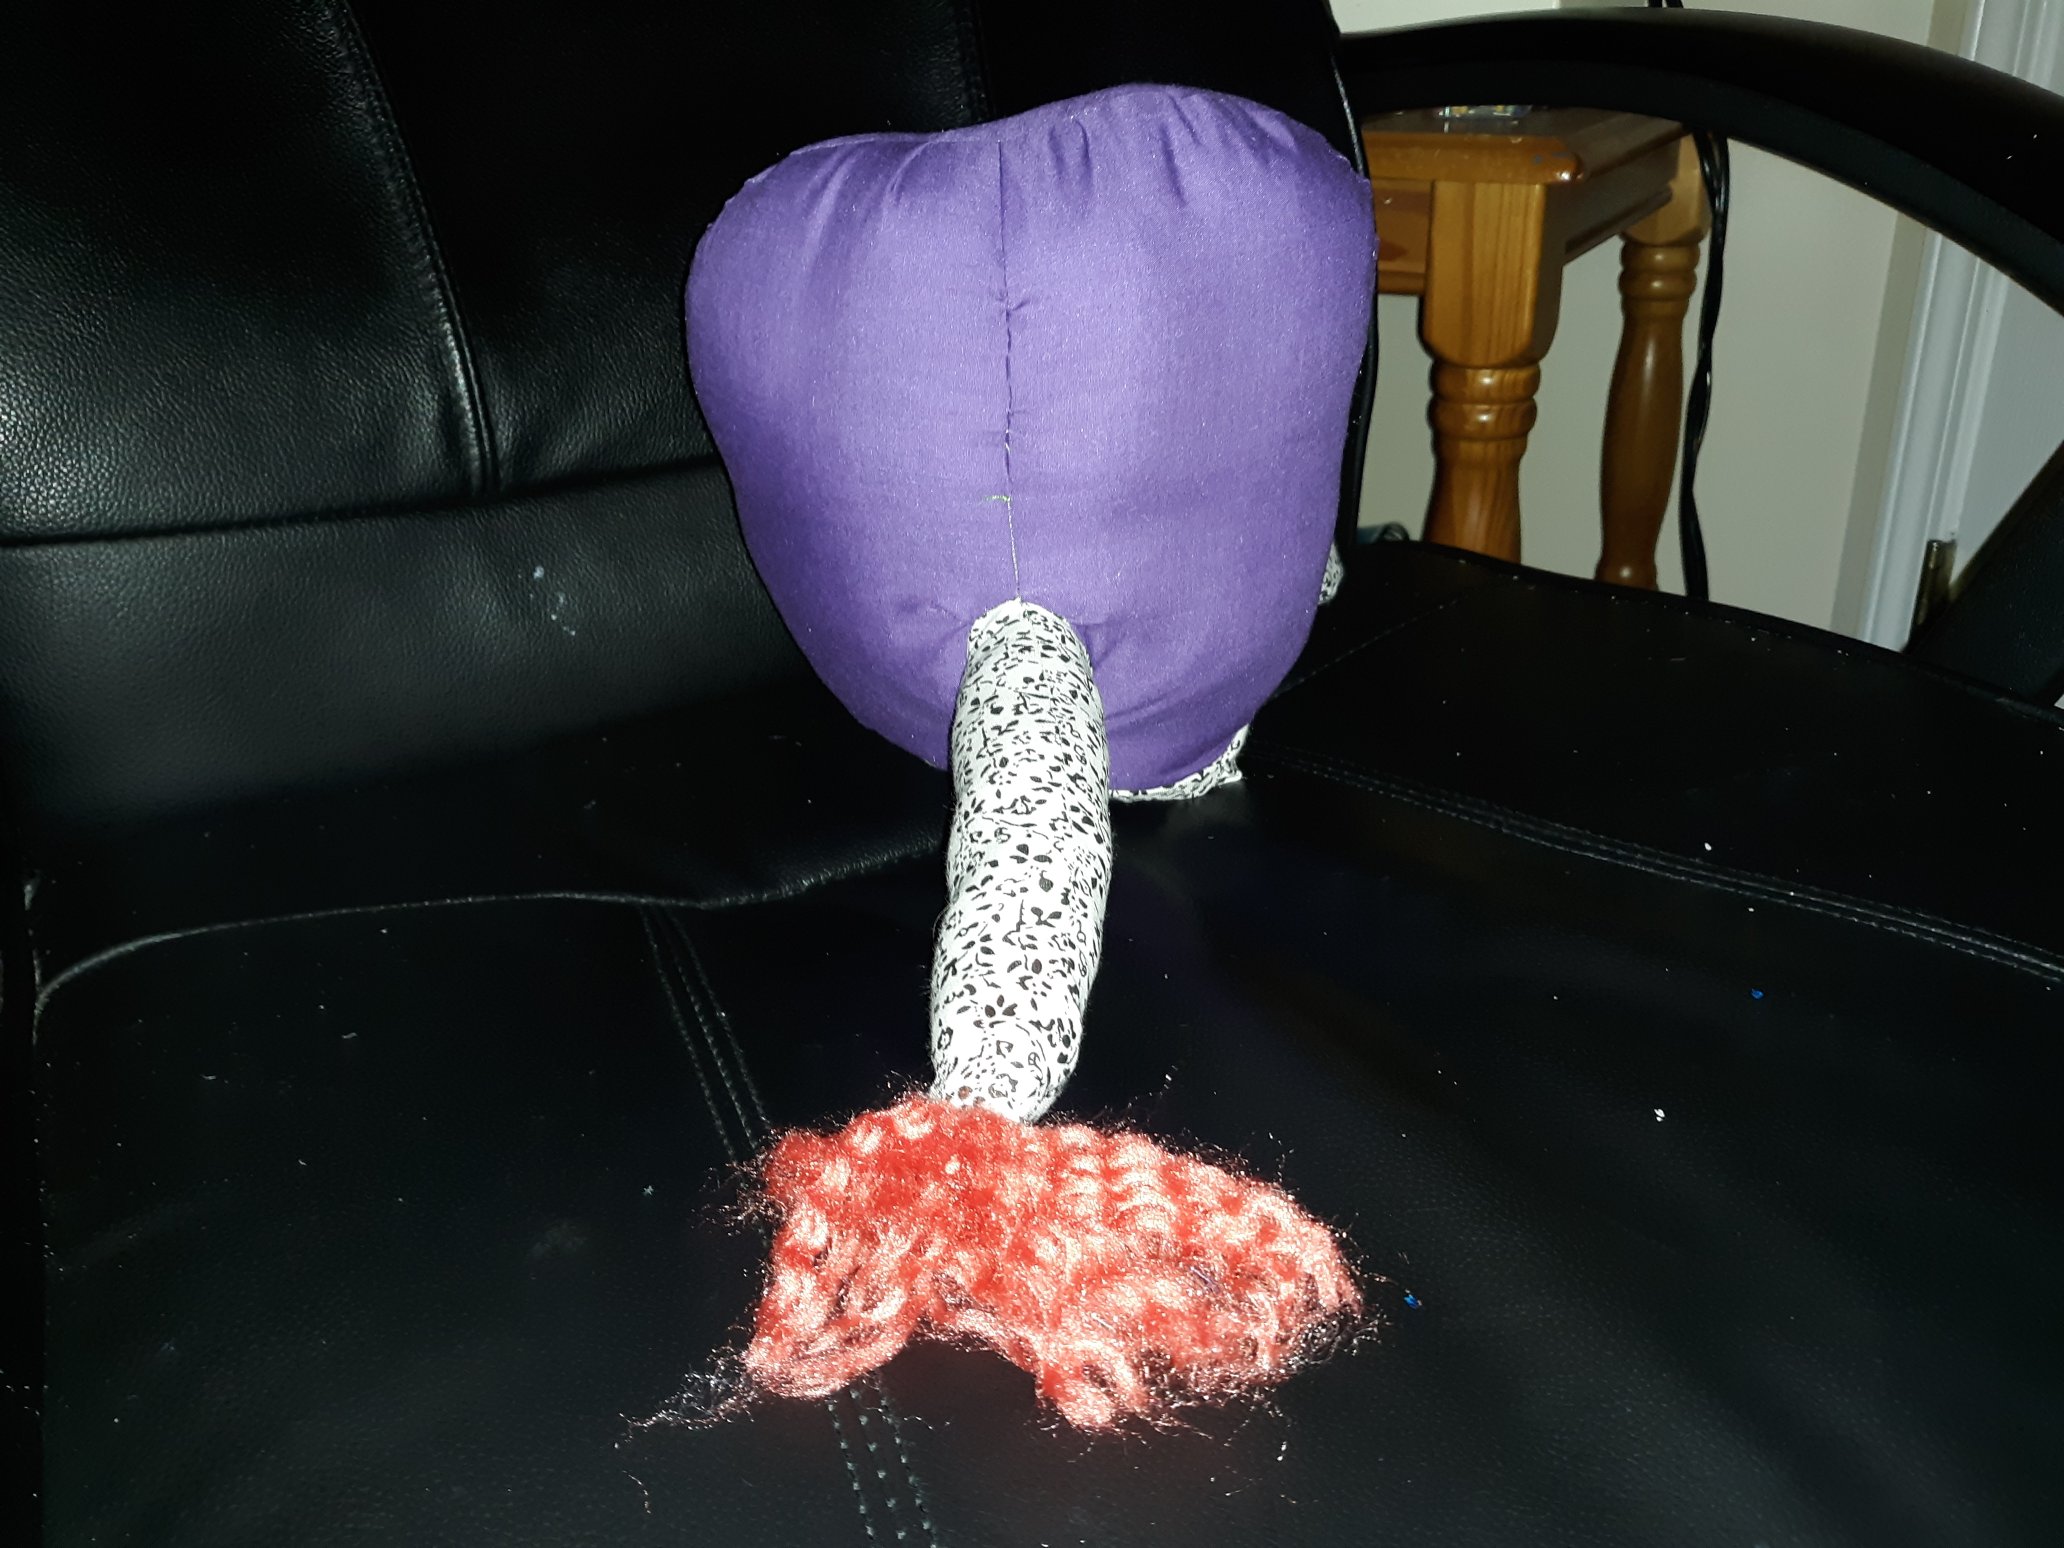 The back of the doll. There is a tail coming out with a salmon colored puff of yarn at the end of it. The tail is of the same black and white floral pattern as the legs.